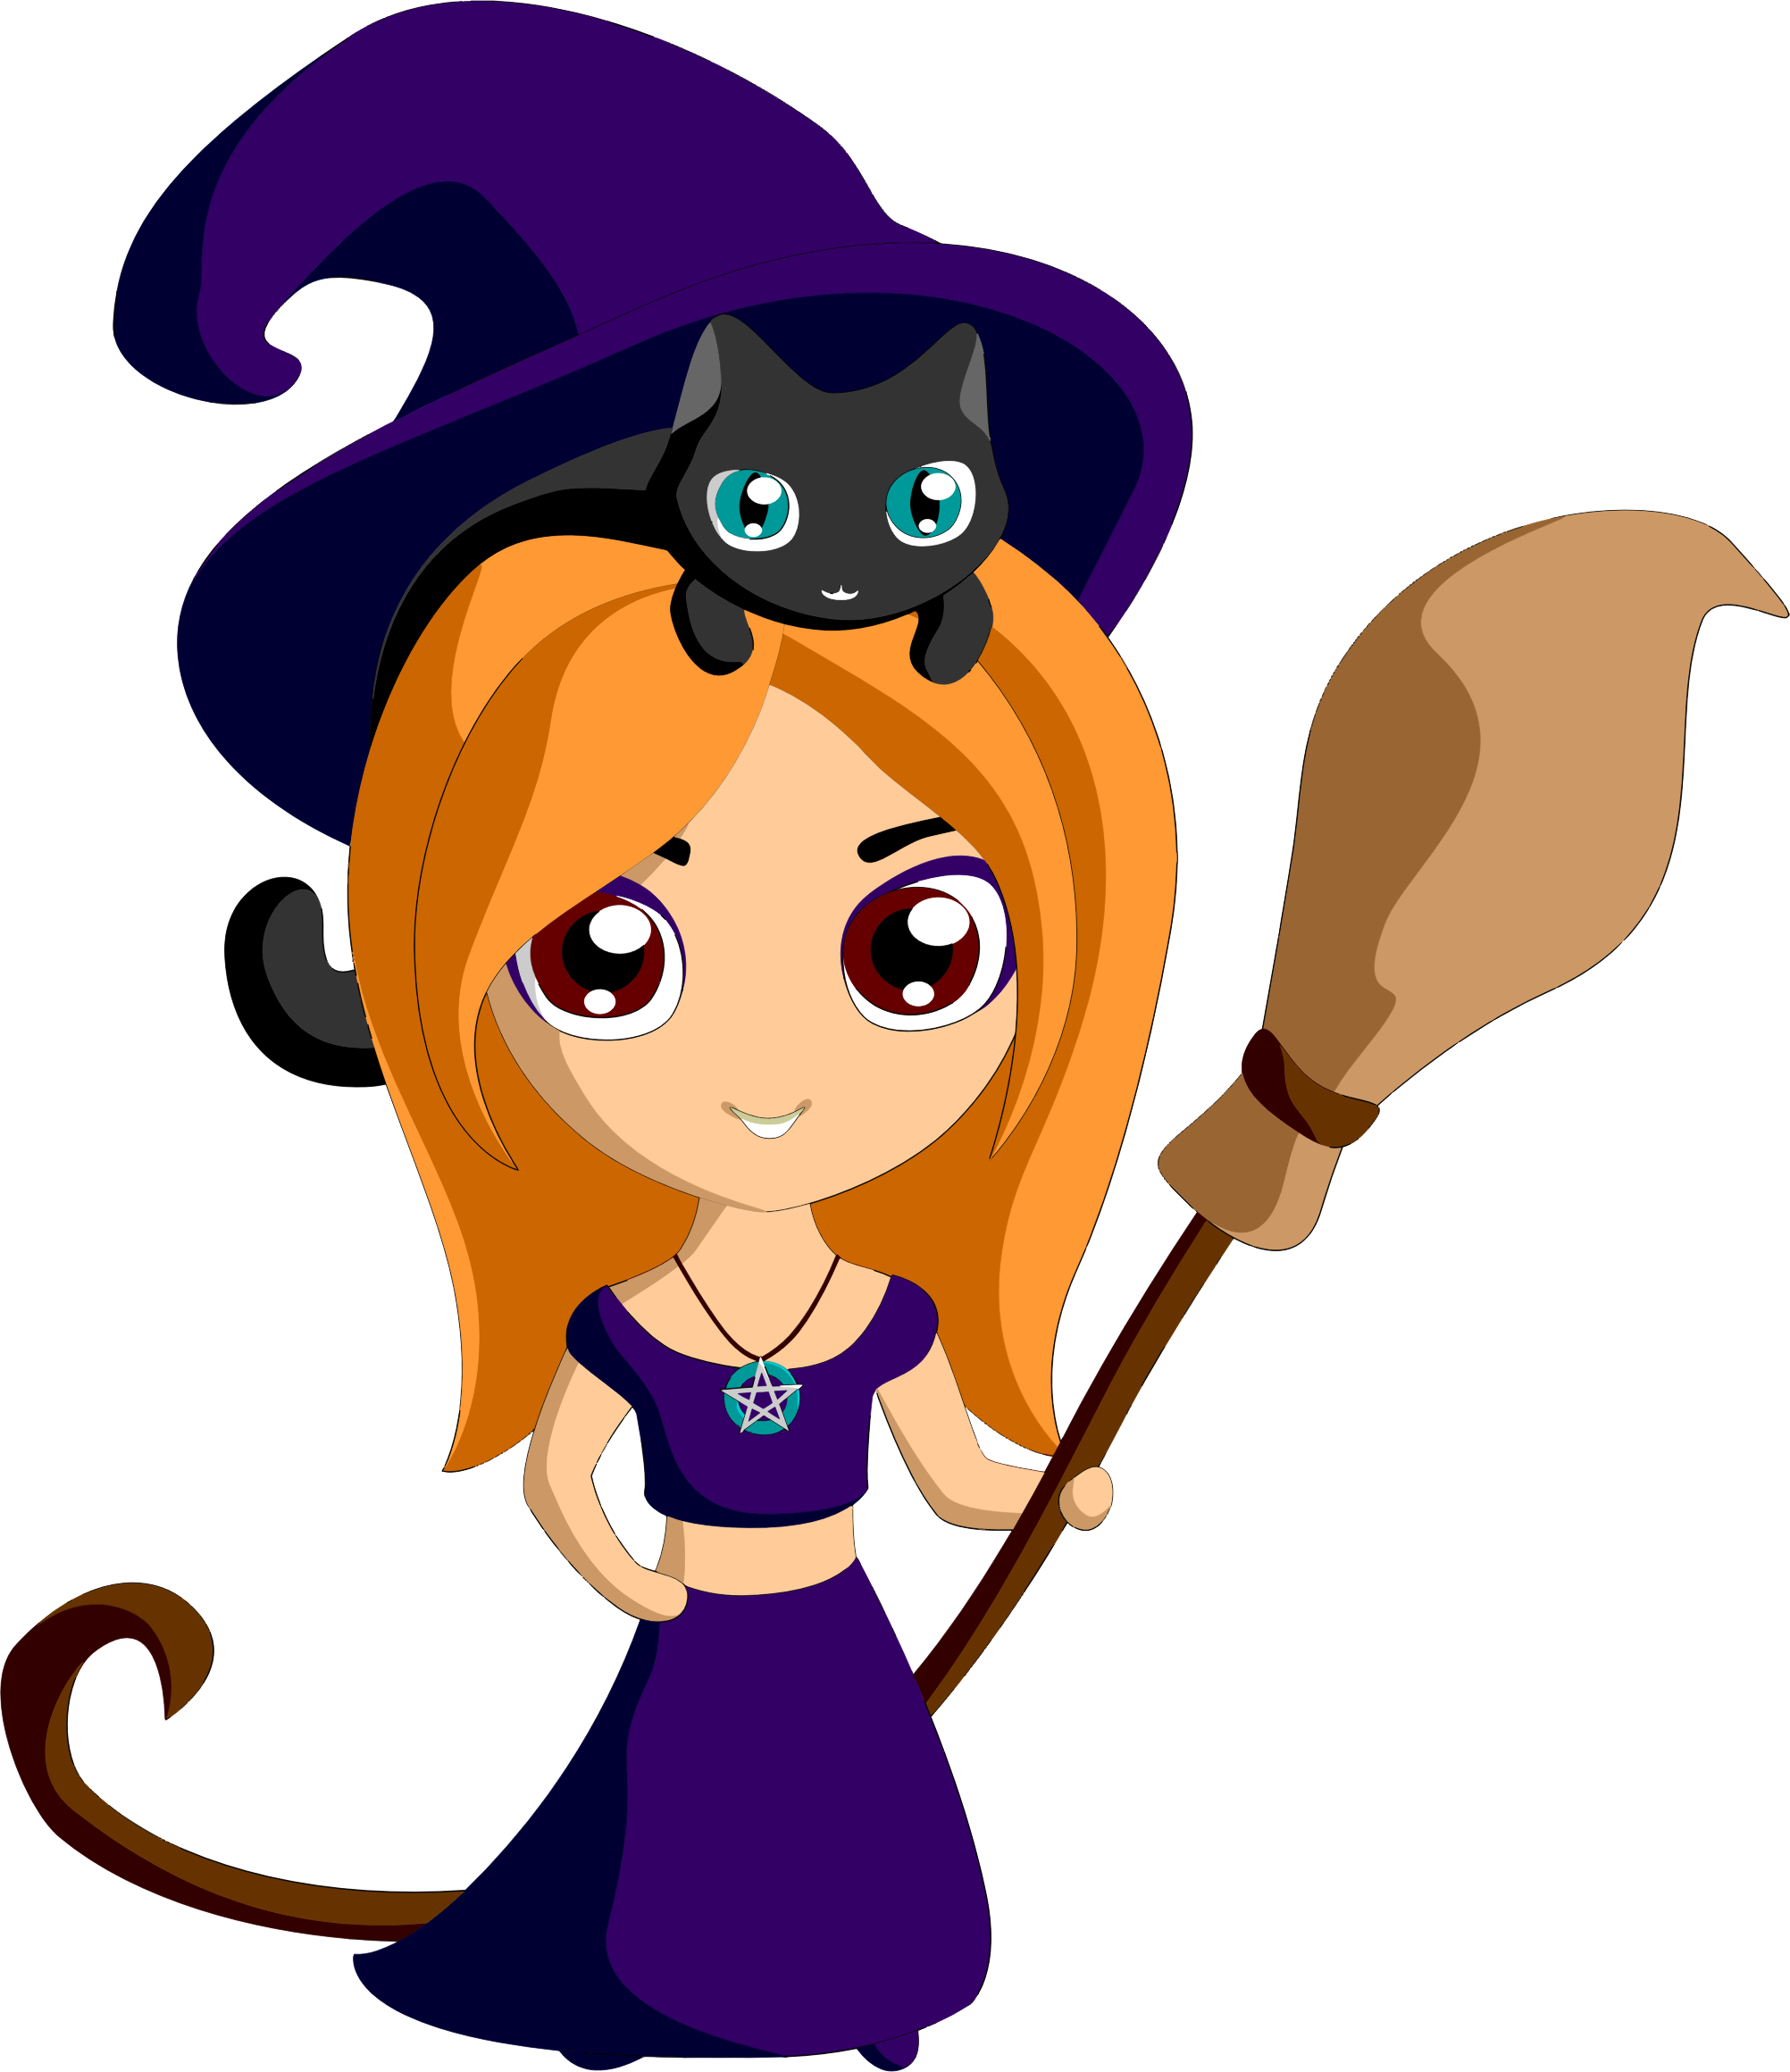 A Cartoon Of A Person Holding A Broom And A Cat On Her Head